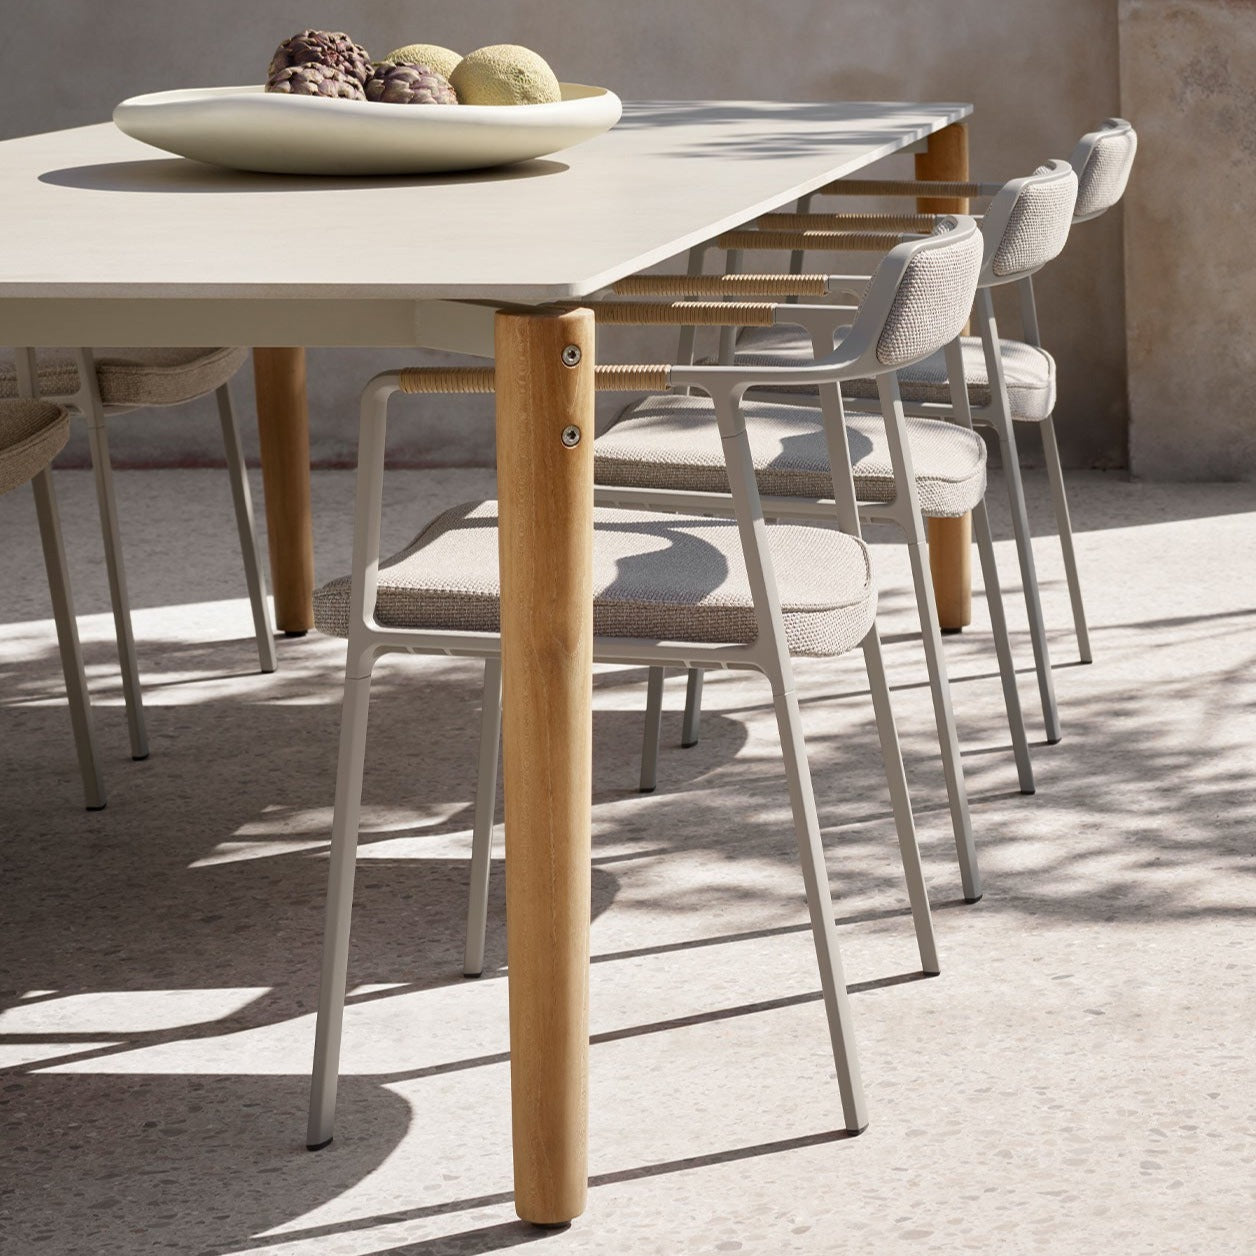 Vipp Open Air Dining Table L250cm